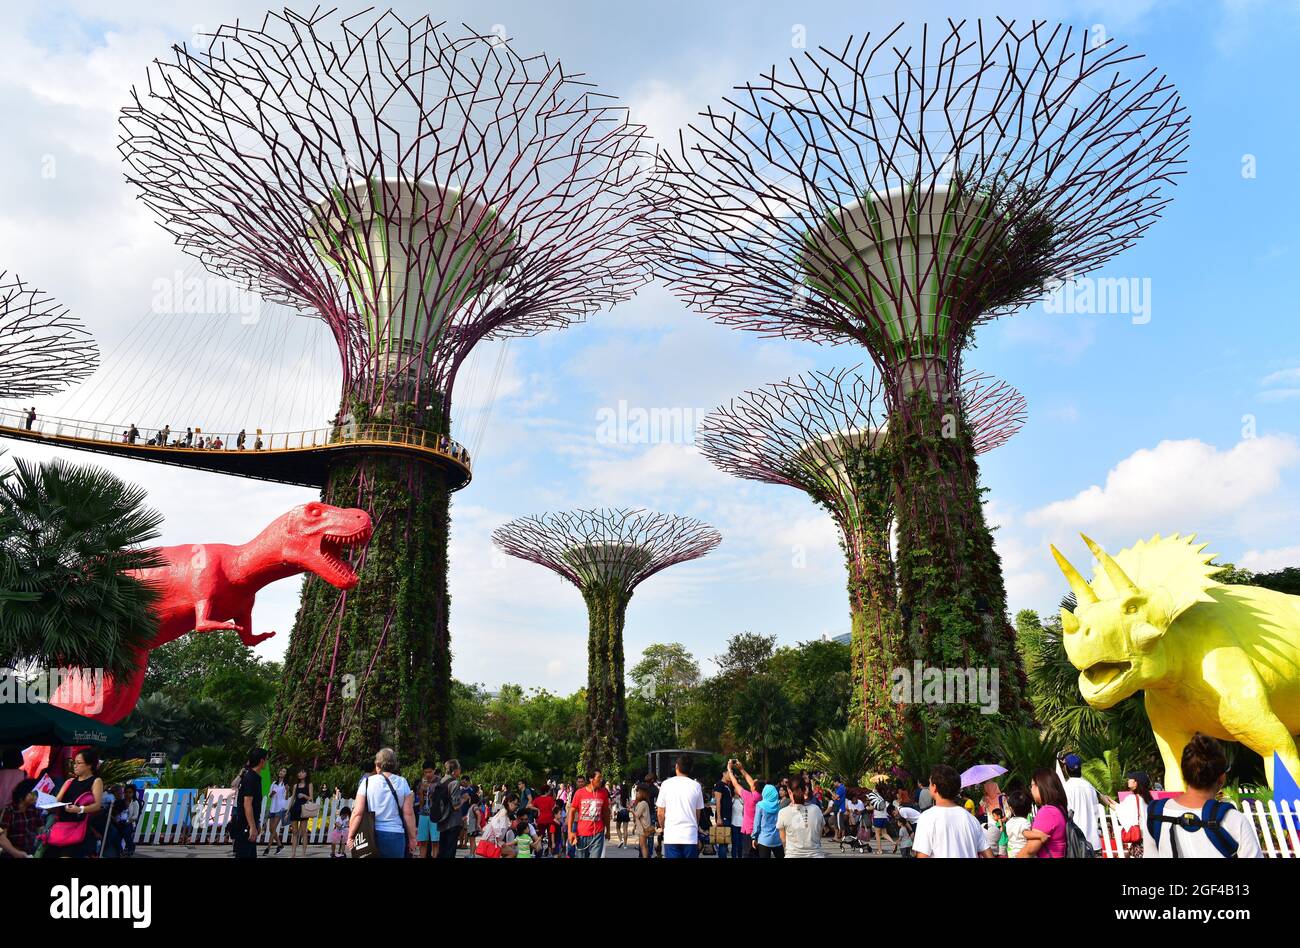 Singapore, Gardens by the Bay. Stock Photo